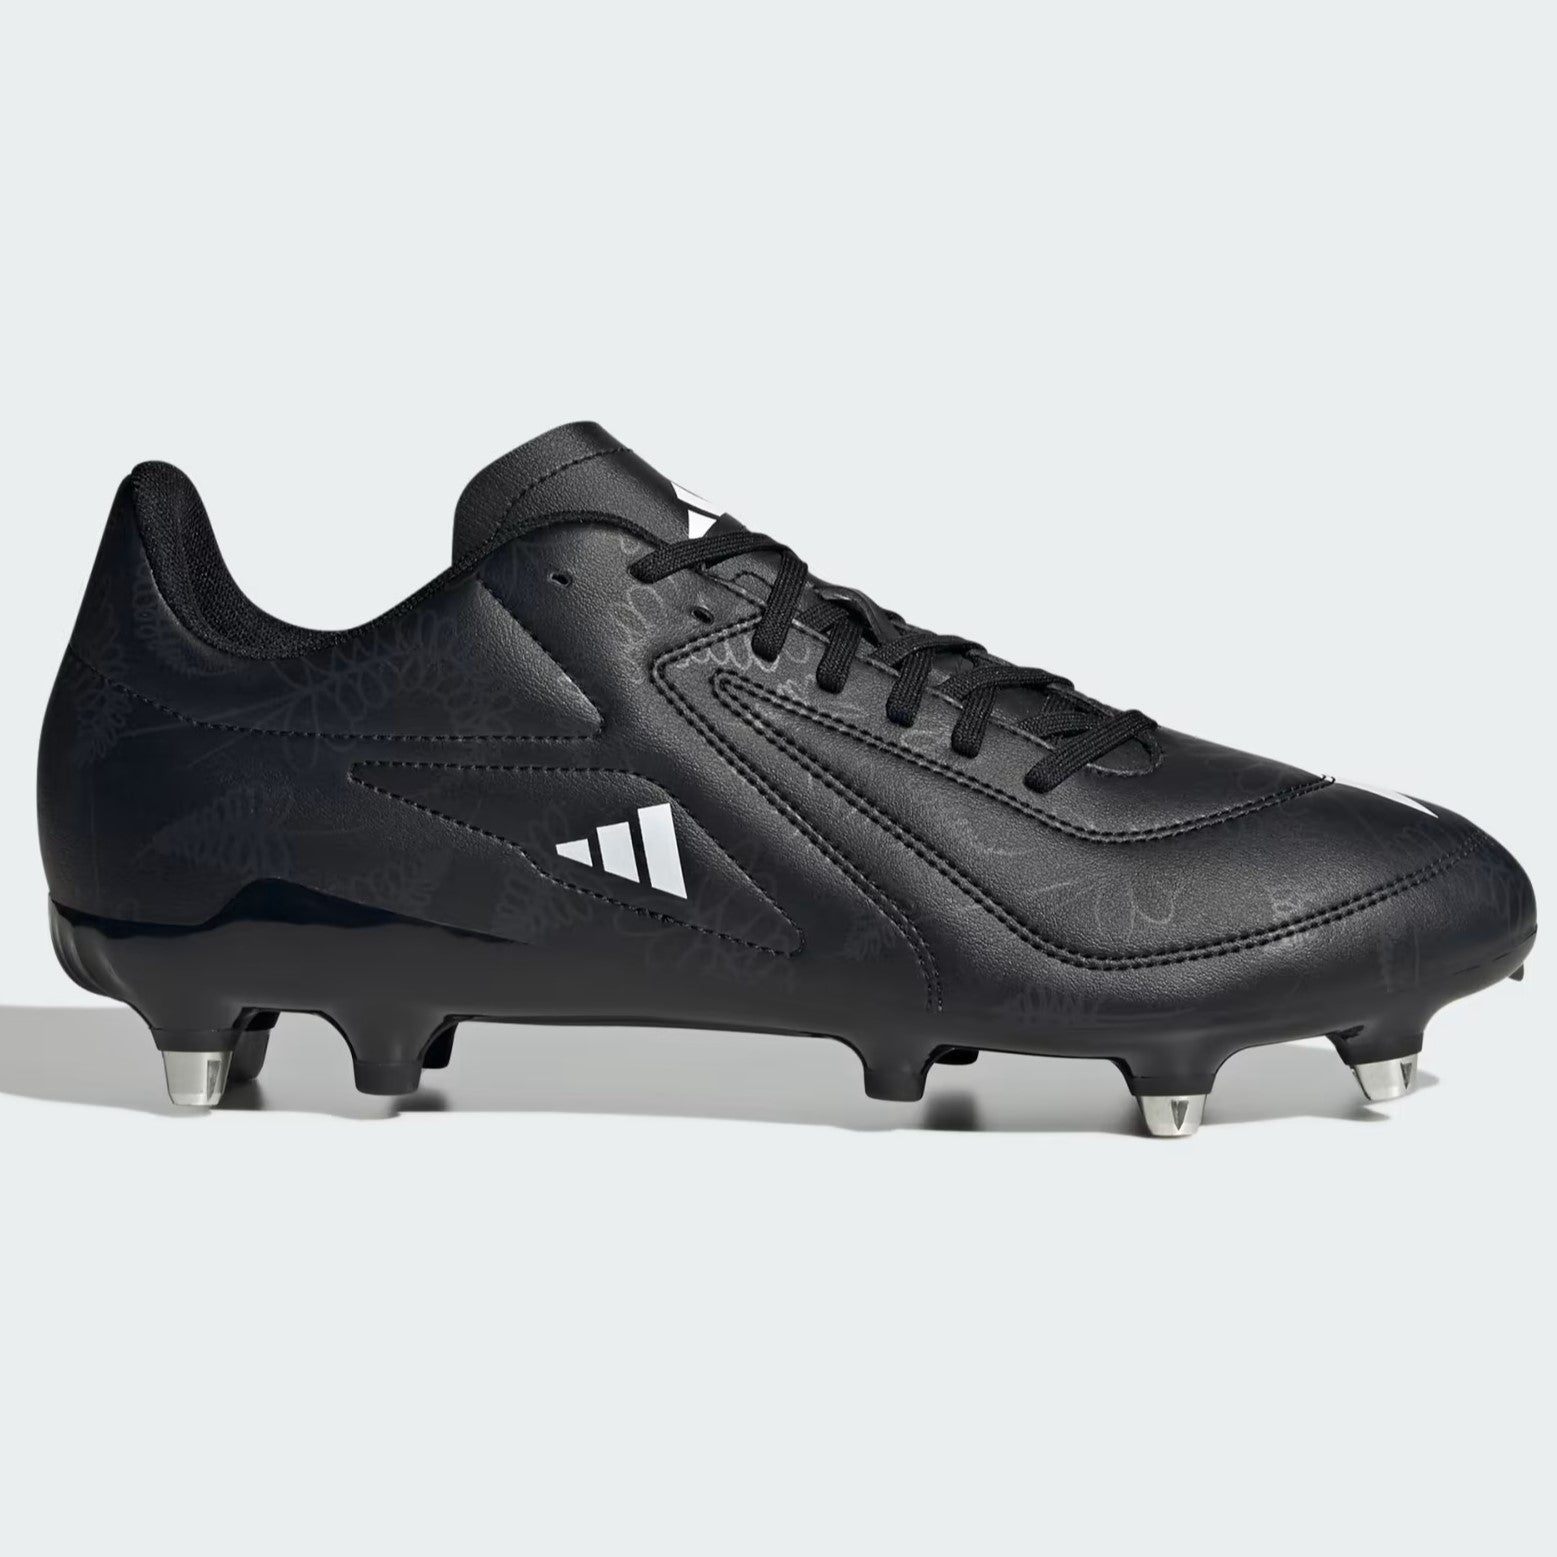 Adidas RS 15 SG Rugby Boots Men's (Black ID6951)